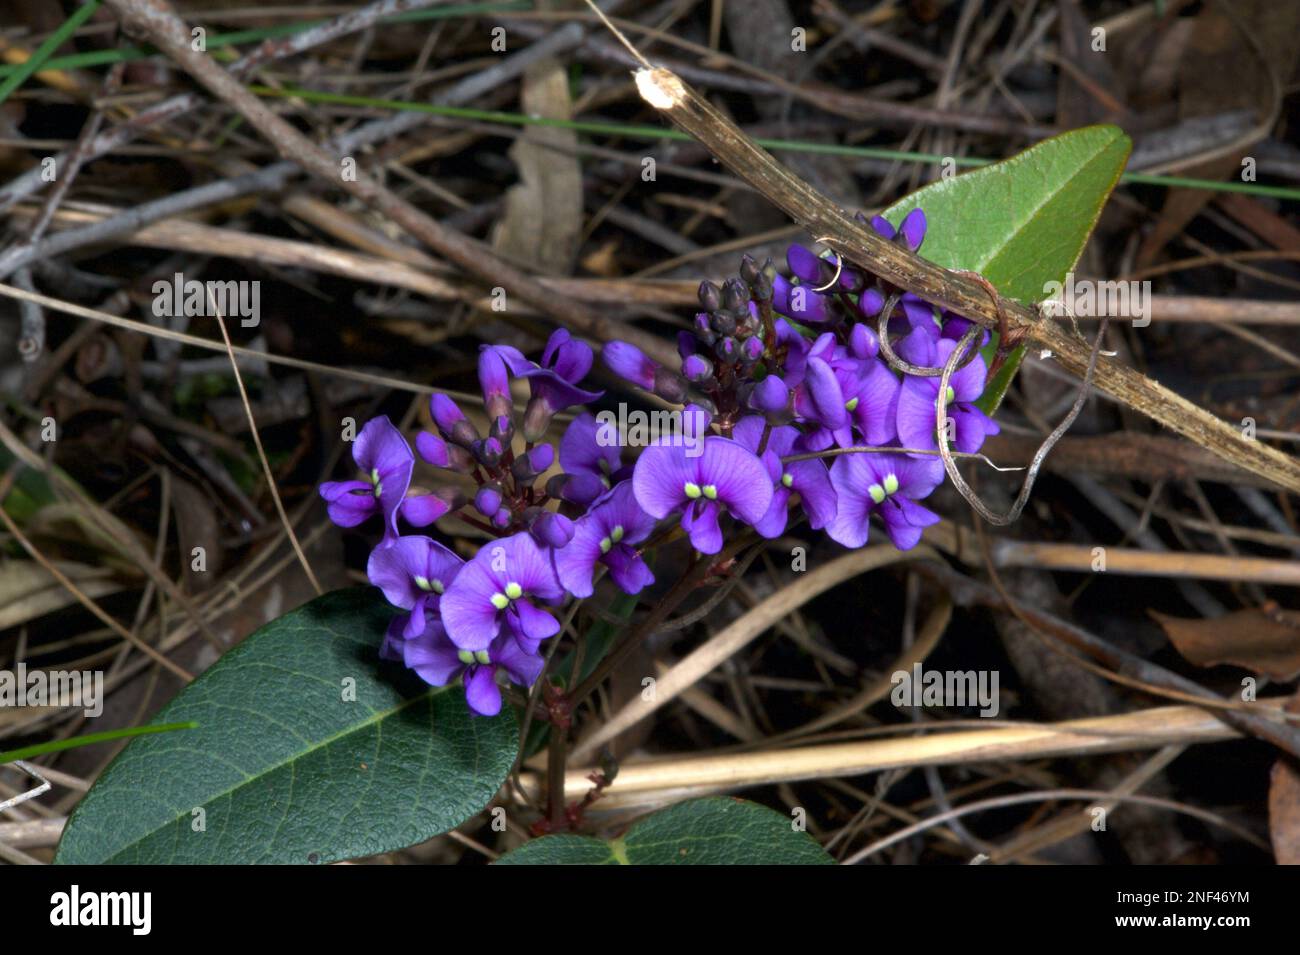 The Hardenbergia Violacea (False Sarsparilla) was having a really good start to Spring this year. The cool, wet weather had reduced the competition. Stock Photo